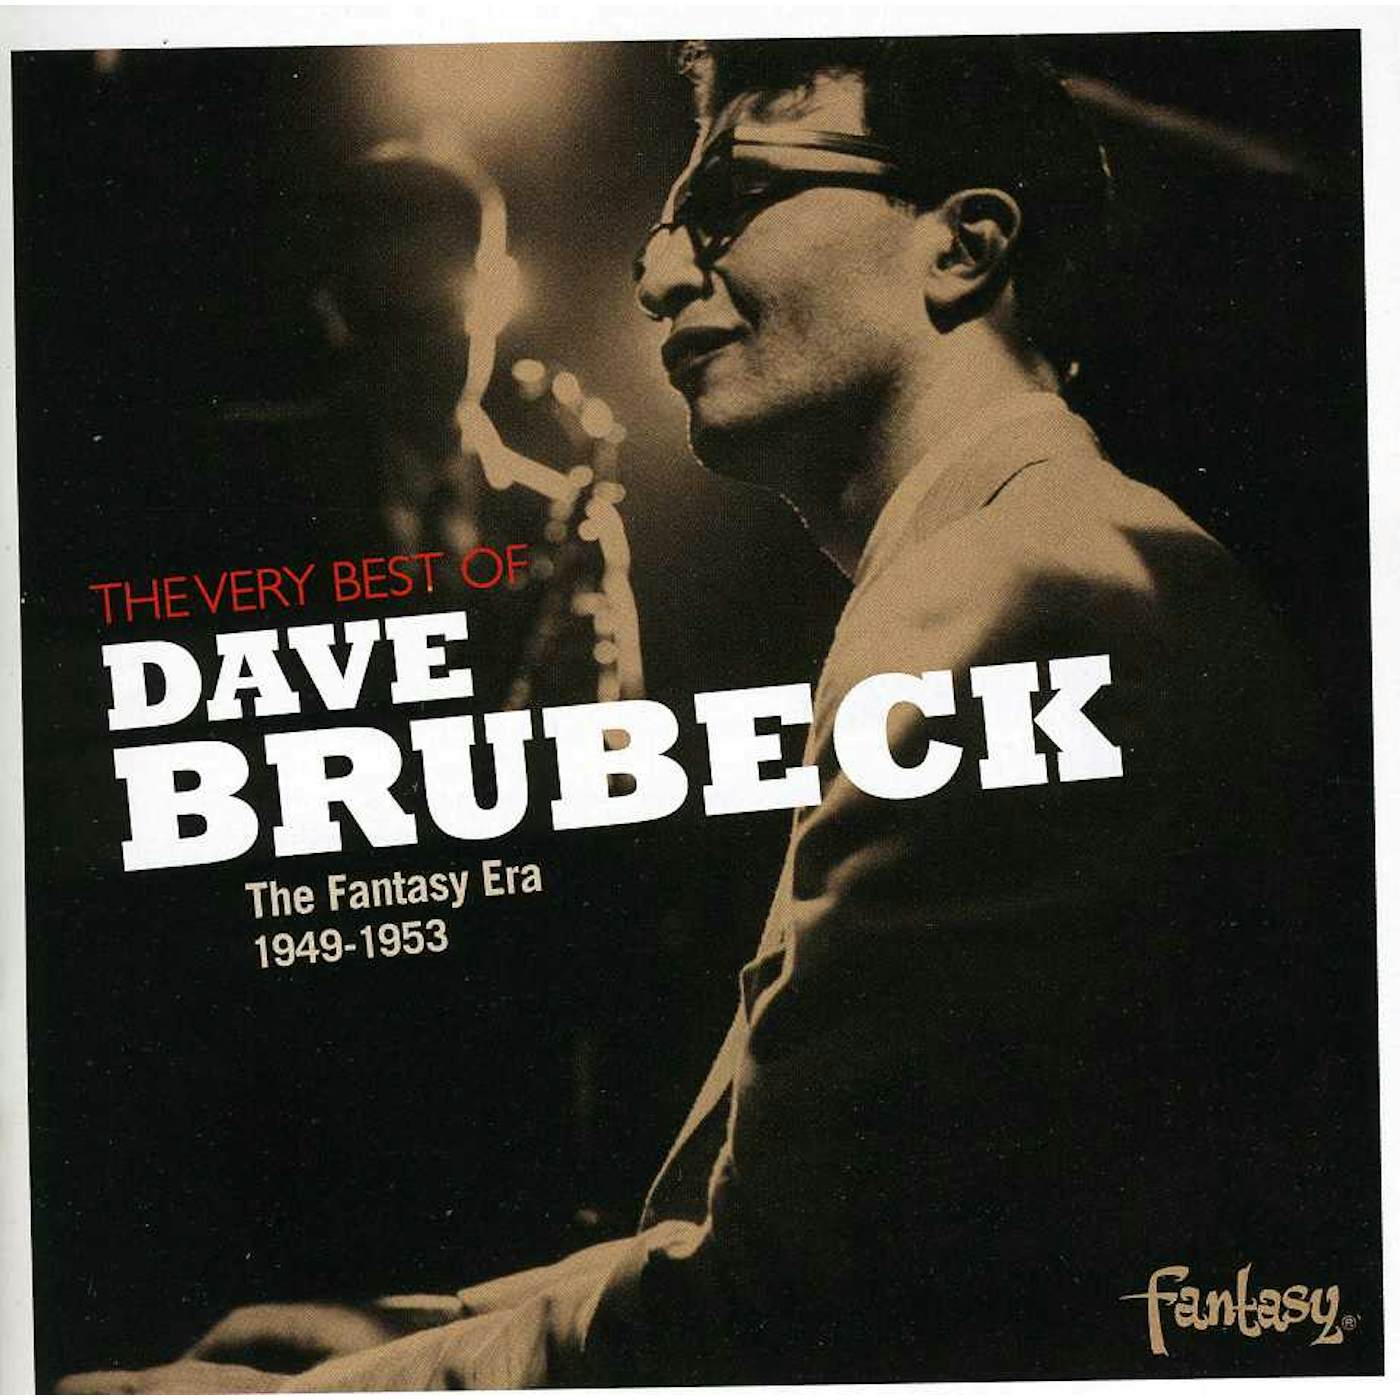 VERY BEST OF DAVE BRUBECK CD